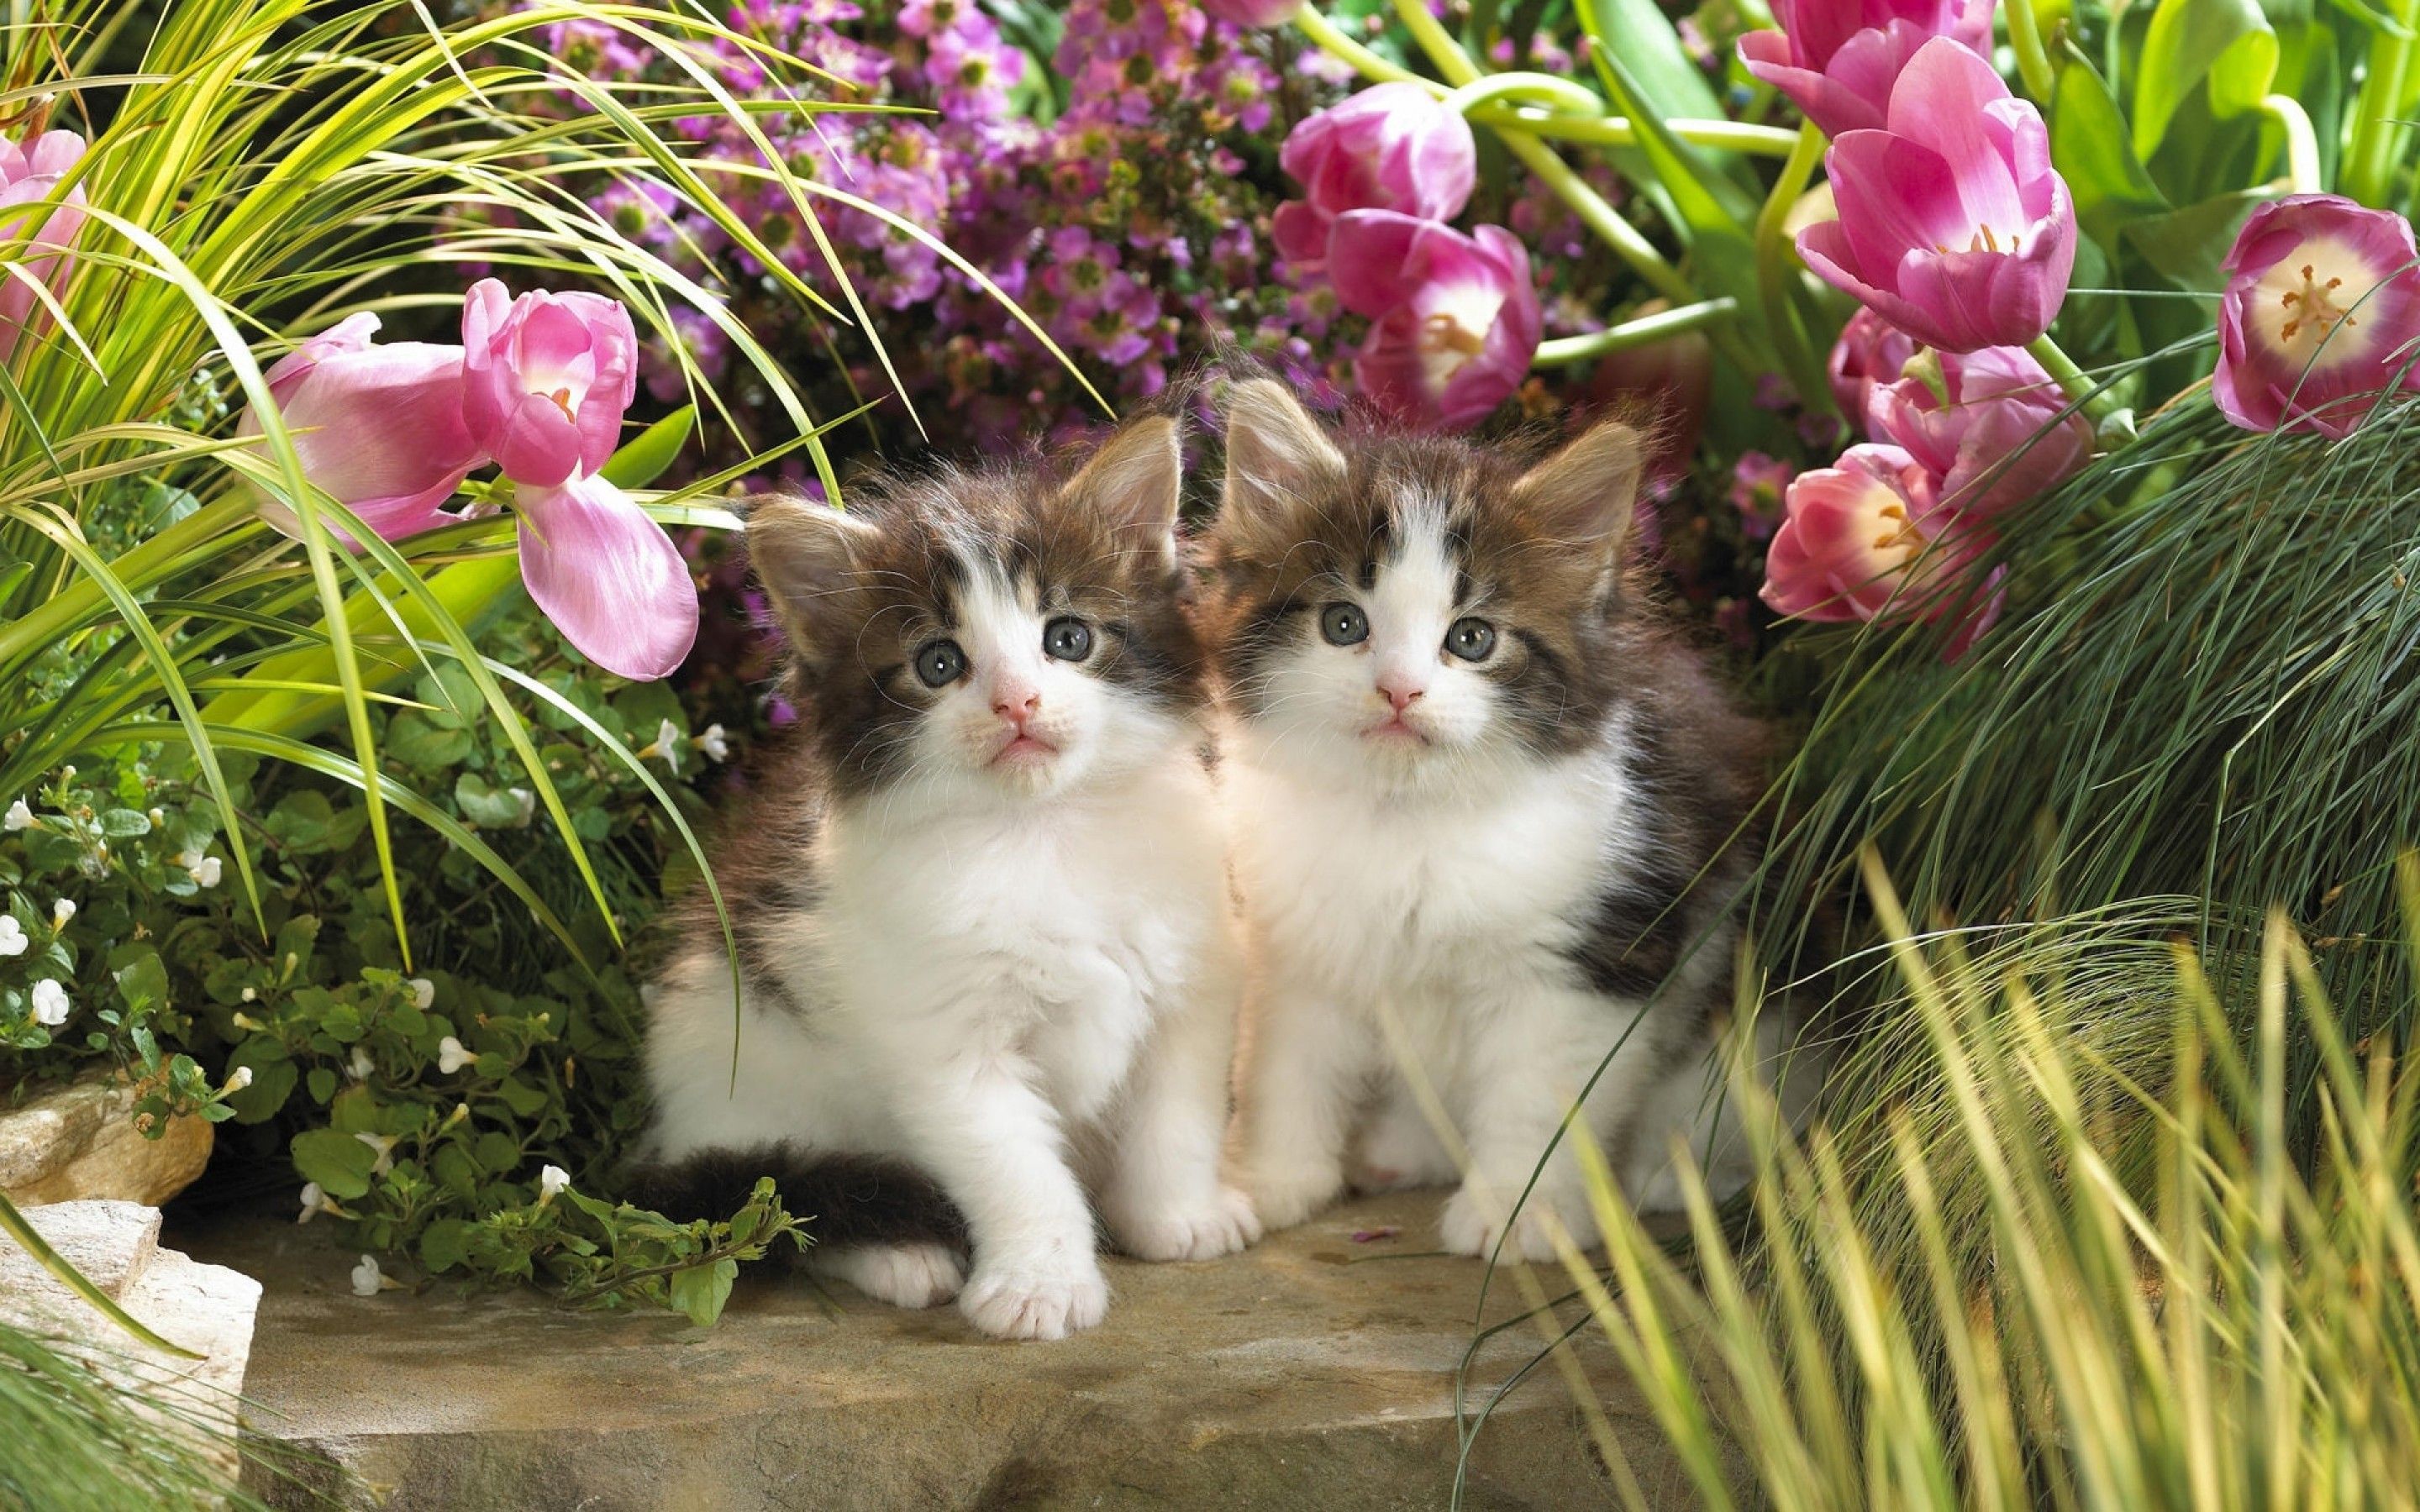 Download 2880x1800 Kittens, Cute, Twins, Flowers, Cats Wallpaper for MacBook Pro 15 inch